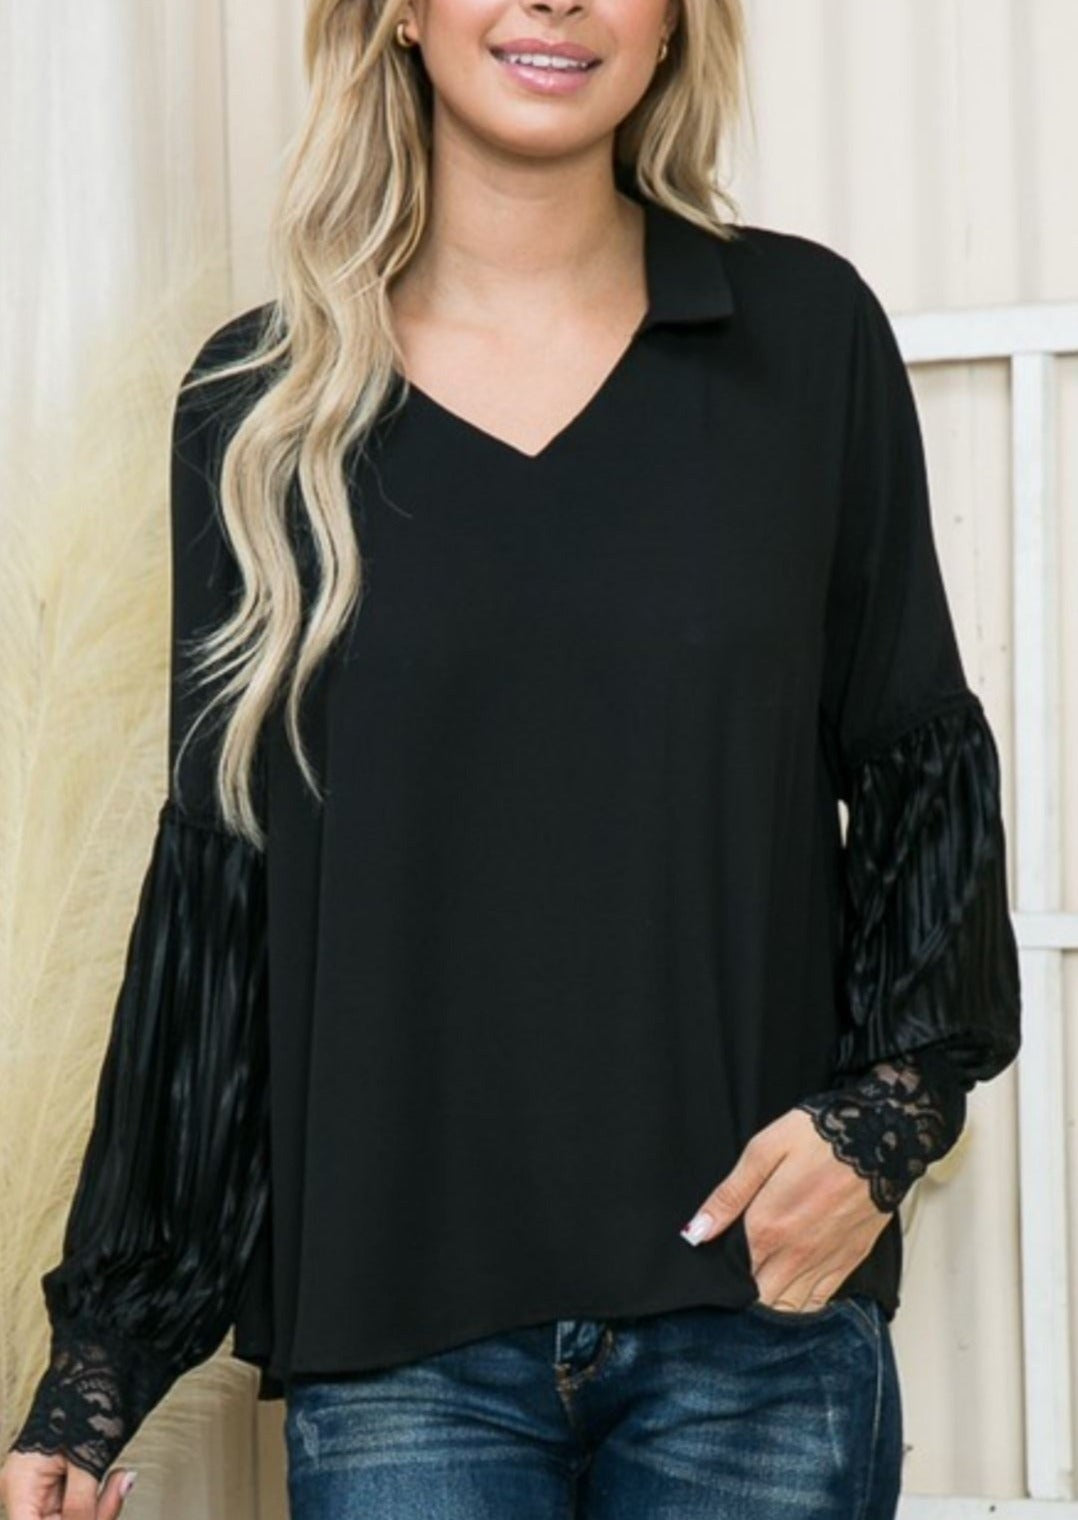 USA Made Ladies Black V-Neck Loose Fit Collared Blouse with Pleated Sleeves & Lace Cuffs | Classy Cozy Cool Women's American Made Boutique